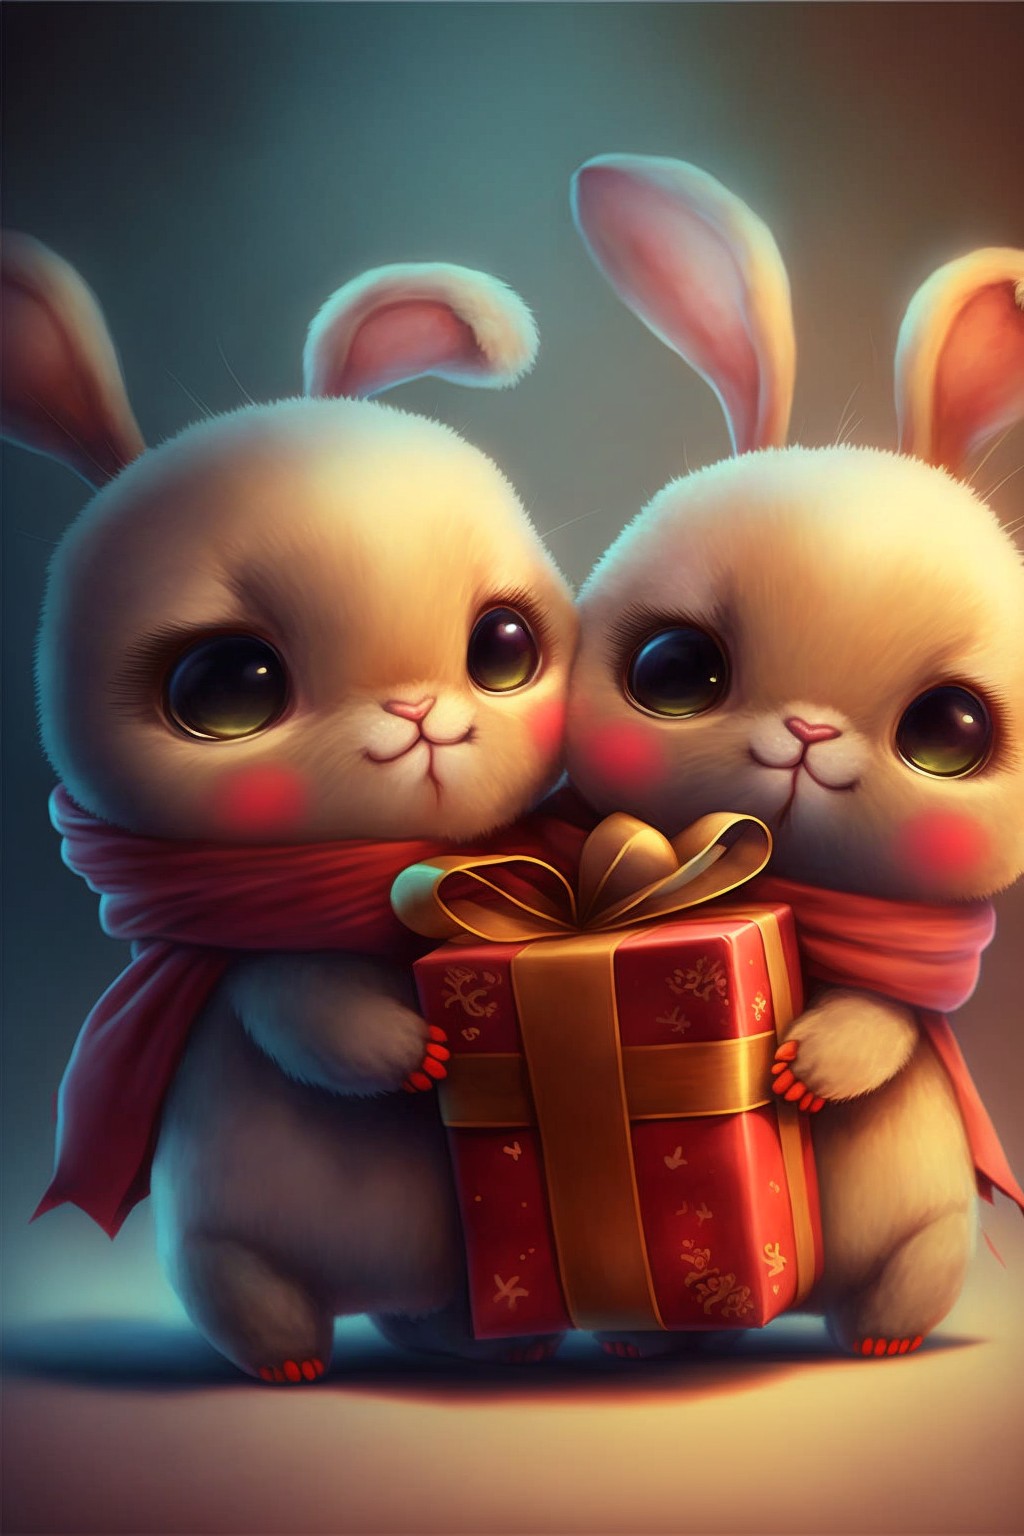 two cute rabbits holding gifts